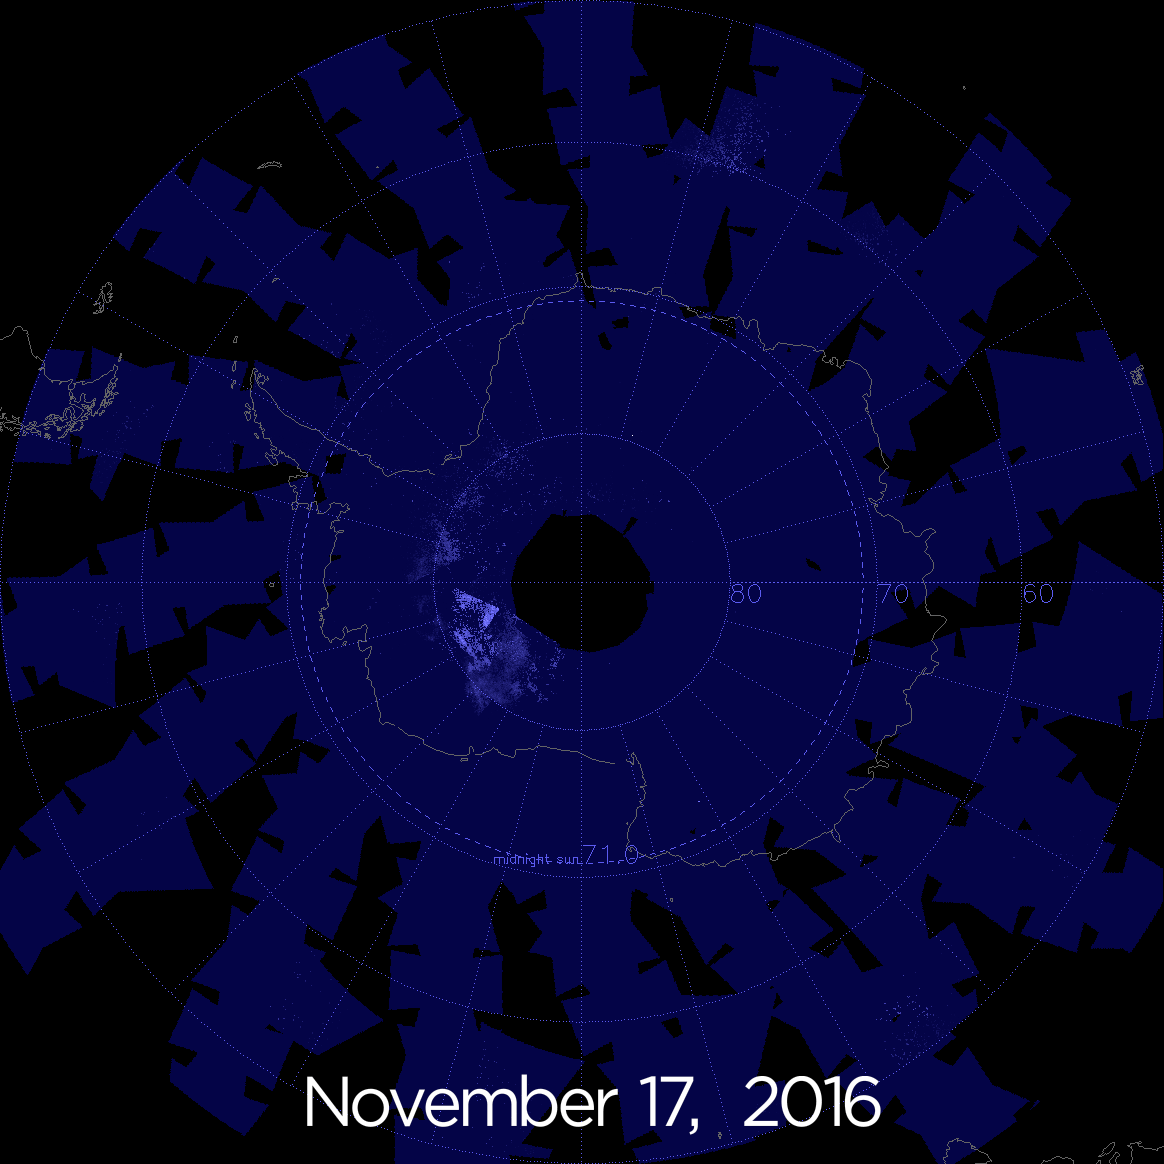 Figure 14: Data from the AIM spacecraft shows the sky over Antarctica is glowing electric blue due to the start of noctilucent, or night-shining, cloud season in the Southern Hemisphere. This data was collected from Nov. 17-28, 2016 (image credit: NASA/HU/VT/CU-LASP/AIM/Joy Ng, producer)